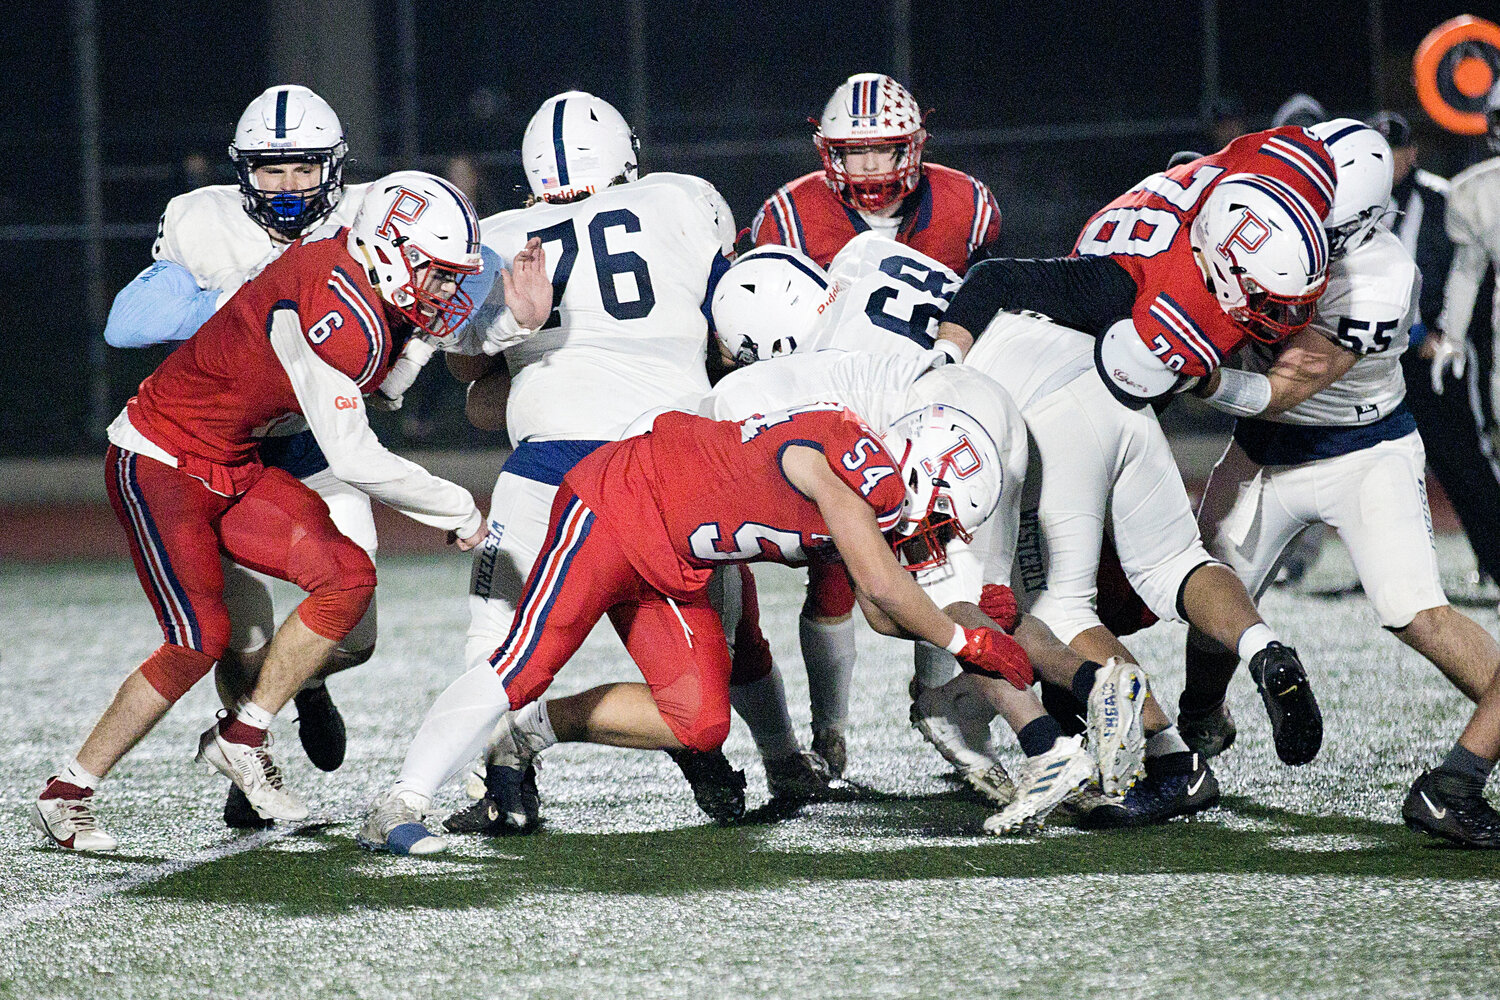 Tristan Conheeny (middle) tackles a Westerly running back at midfield.